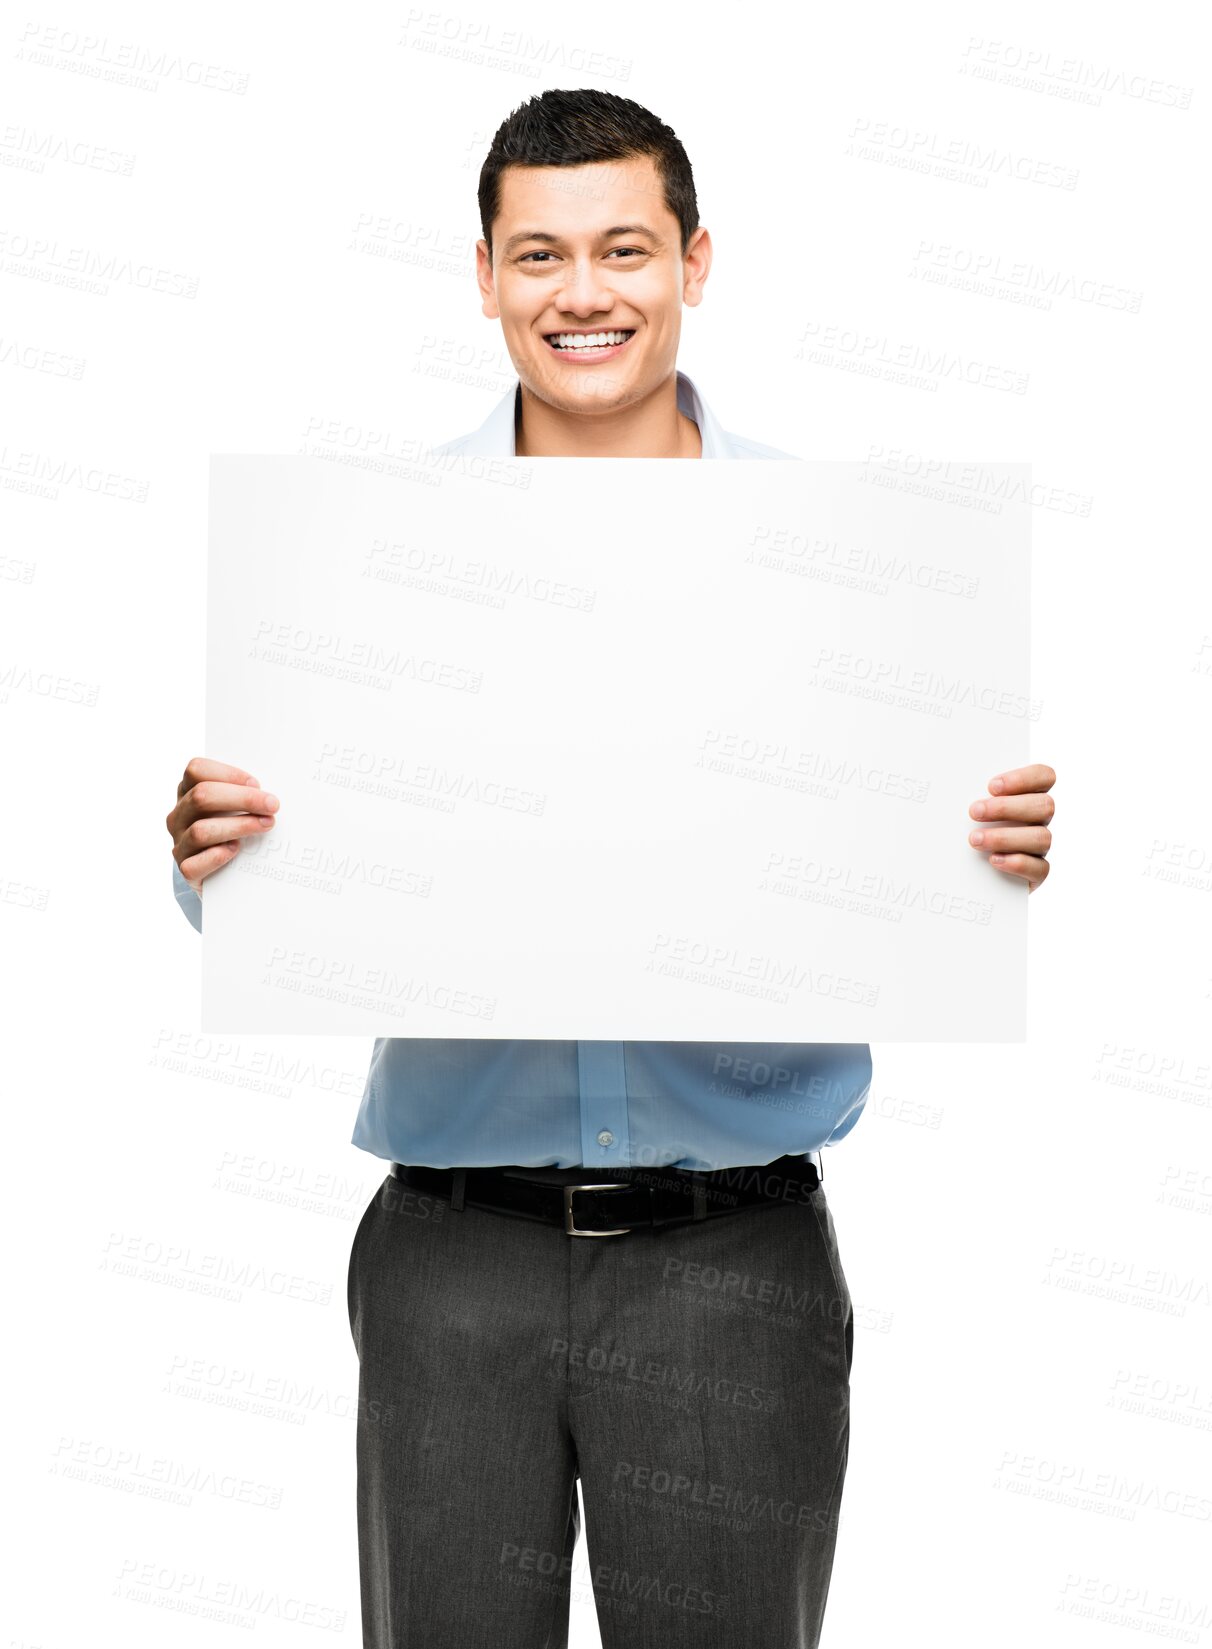 Buy stock photo Billboard, poster and portrait of business man on isolated, PNG and transparent background. Professional worker, marketing and happy male person with banner for branding, advertising and promotion